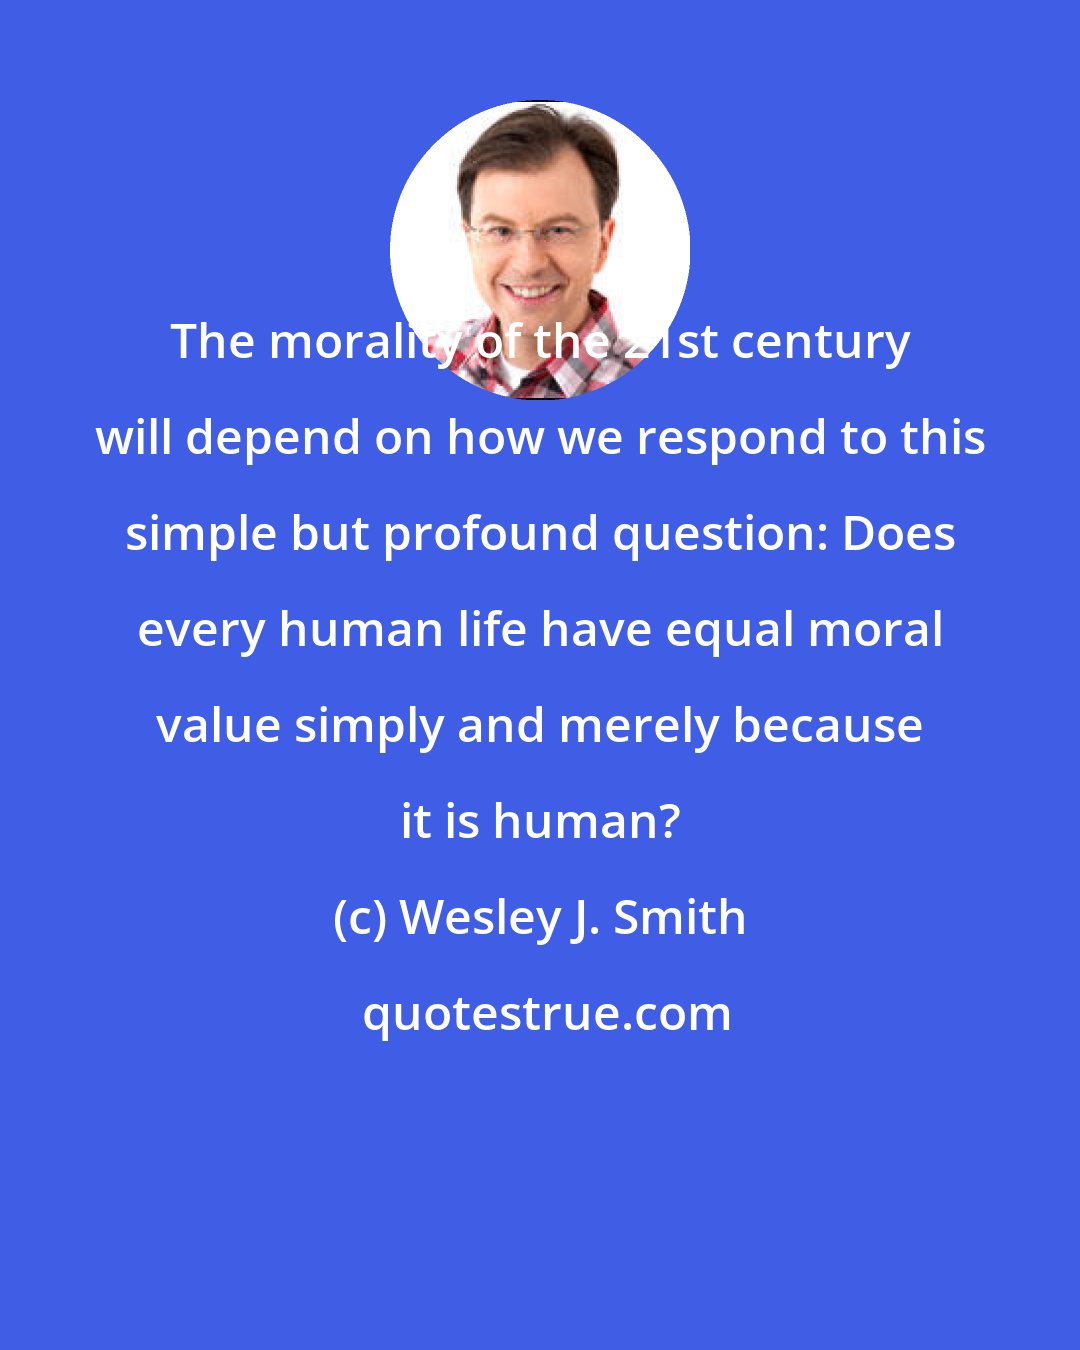 Wesley J. Smith: The morality of the 21st century will depend on how we respond to this simple but profound question: Does every human life have equal moral value simply and merely because it is human?